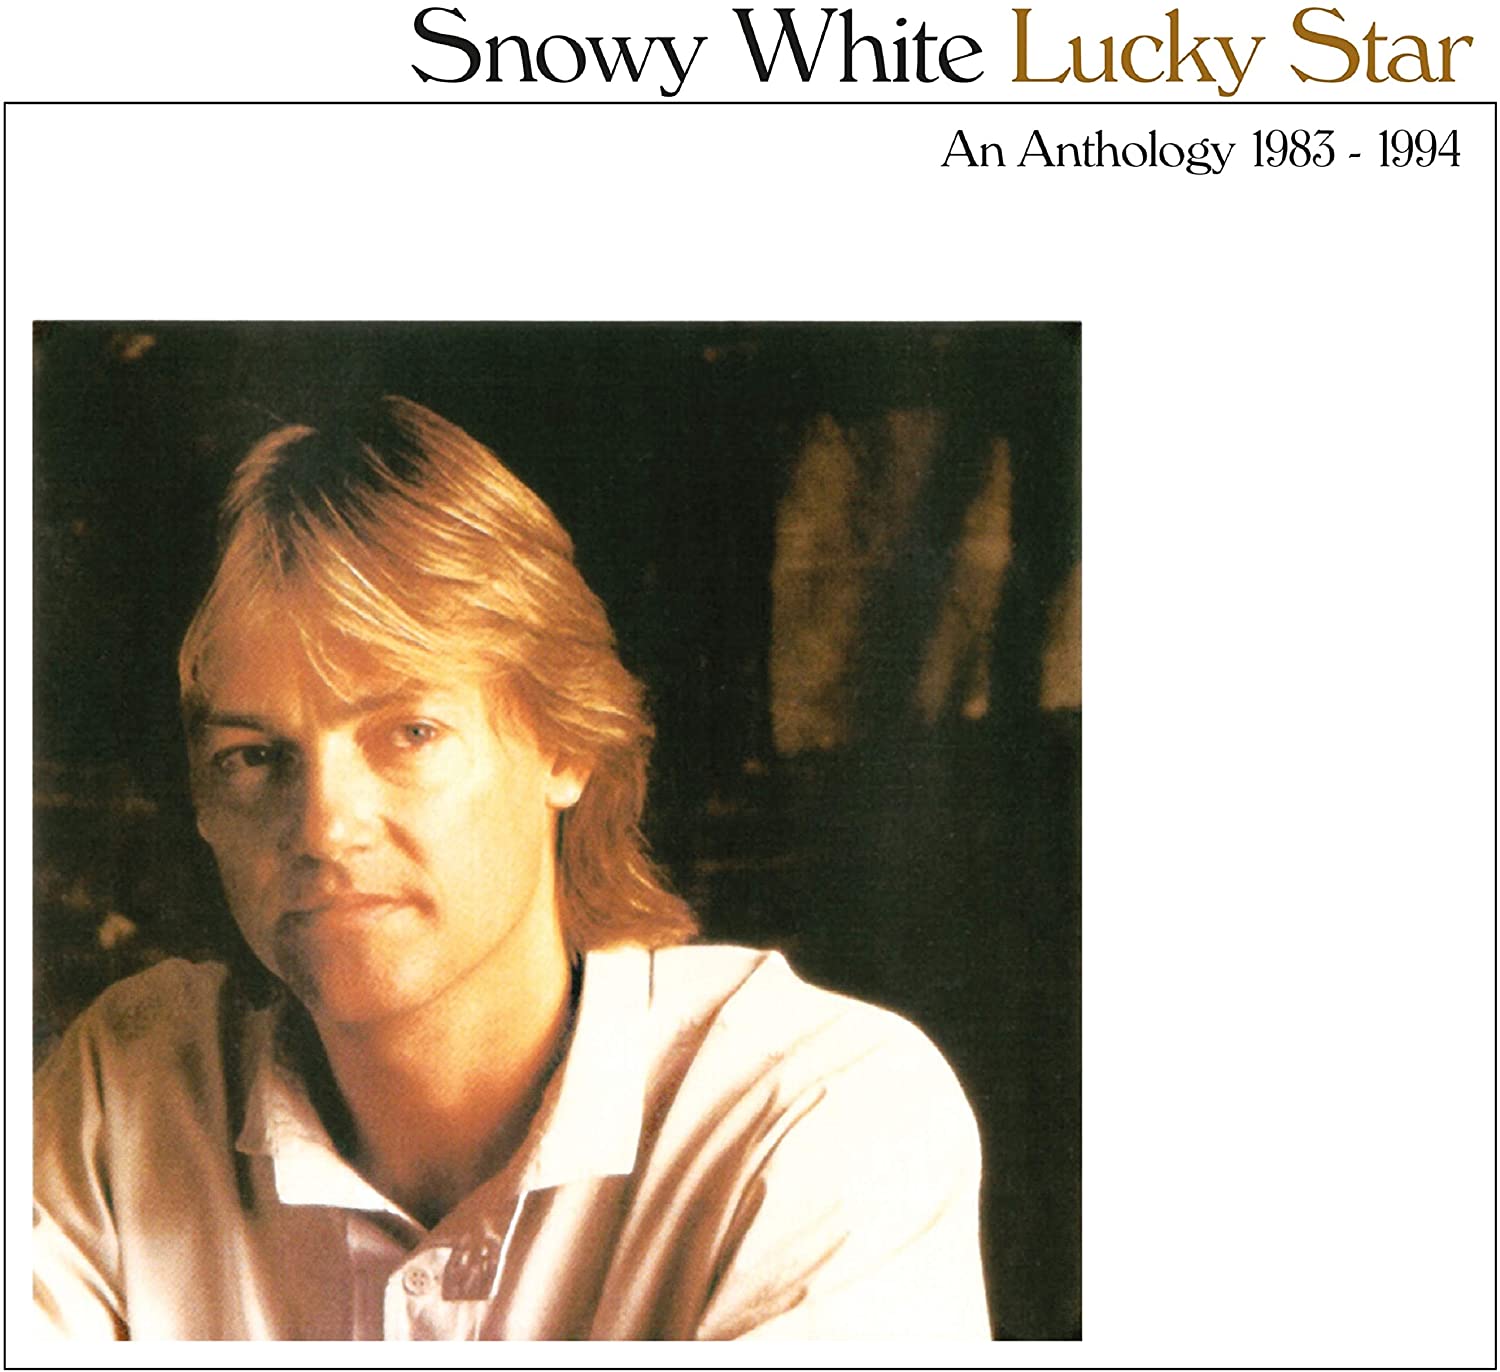 Snowy White / Lucky Star: An Anthology 1983-1994